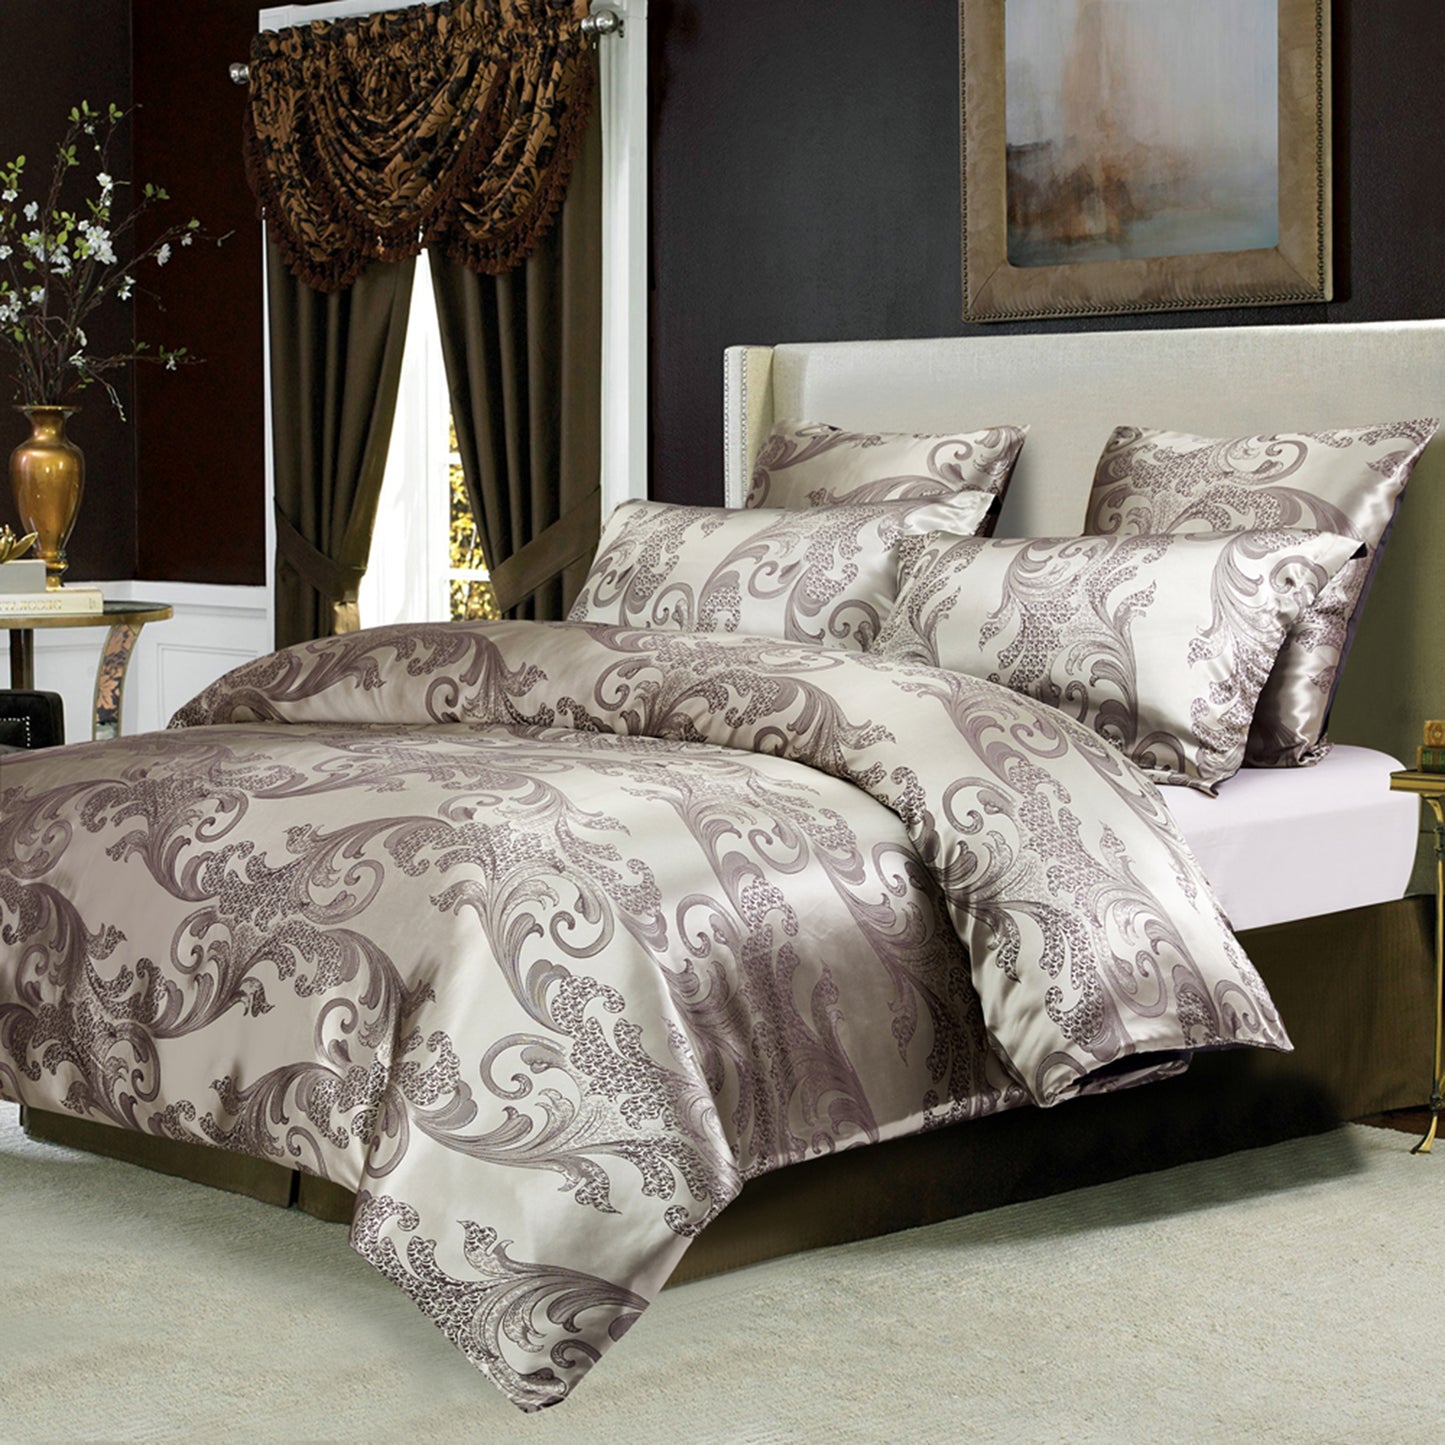 WONGS BEDDING Silver Gray Embroidery Satin Craft Duvet Cover Set With 2 Pillow Case